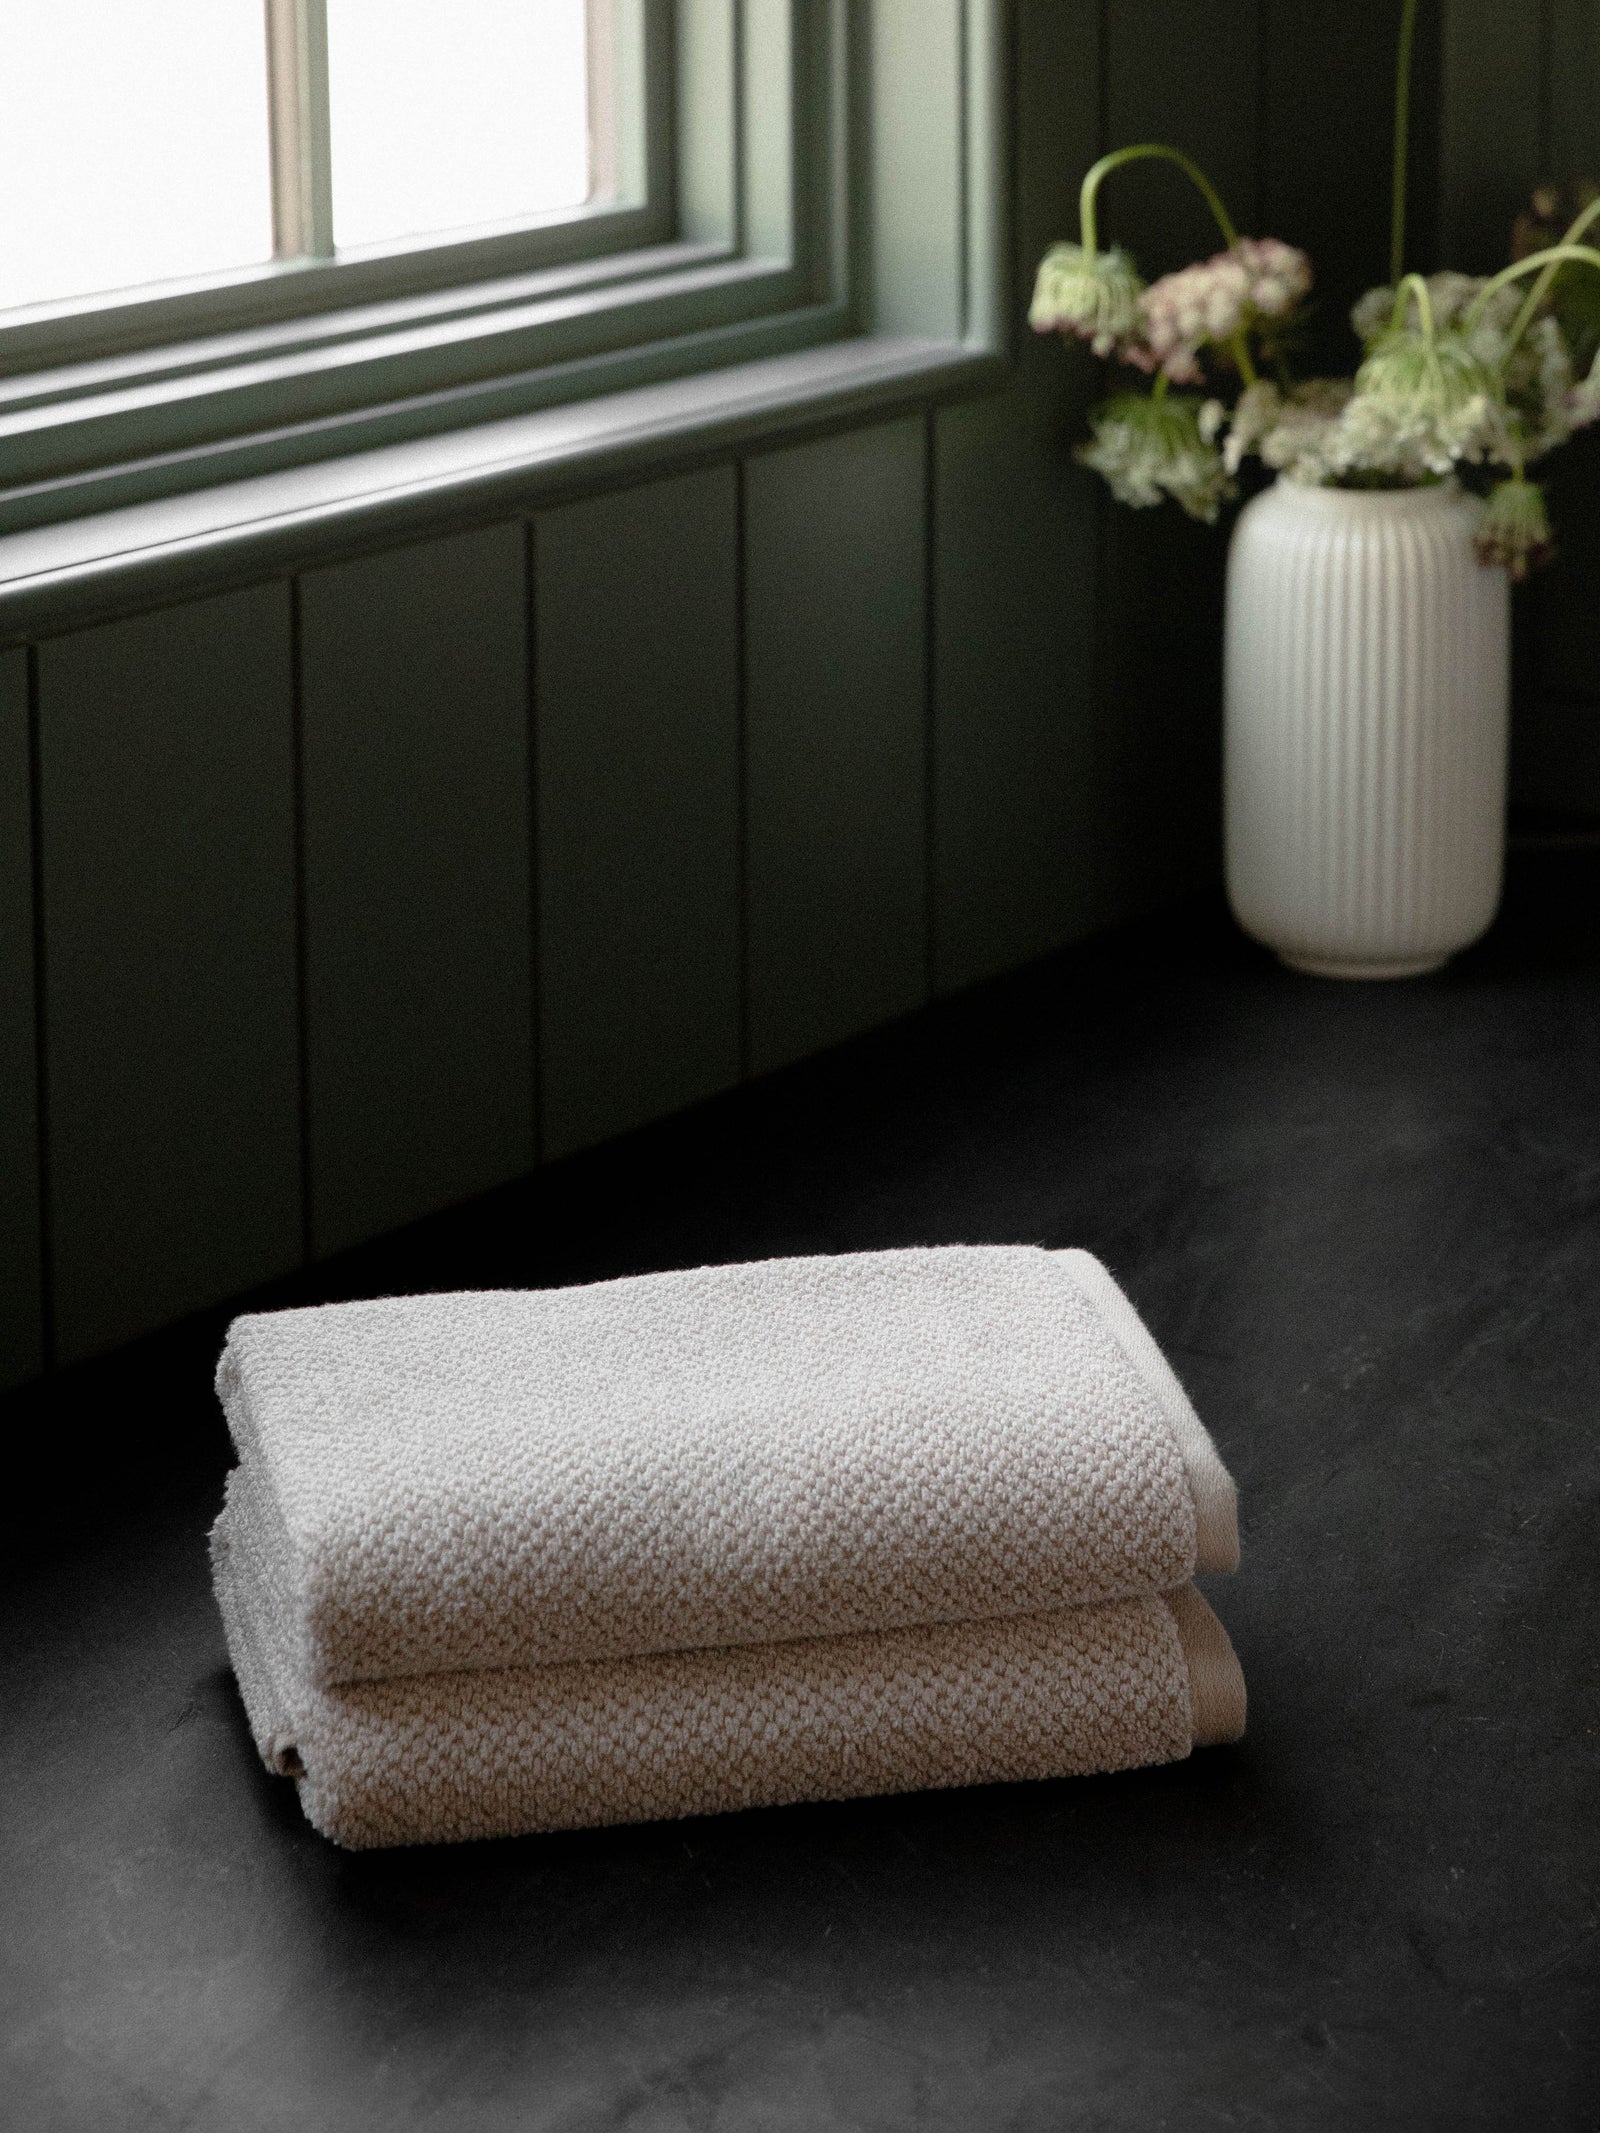 Nantucket Hand Towels in the color Heathered Sand. Photo of Nantucket Hand Towels taken with the Hand Towels resting on a countertop in a bathroom. 